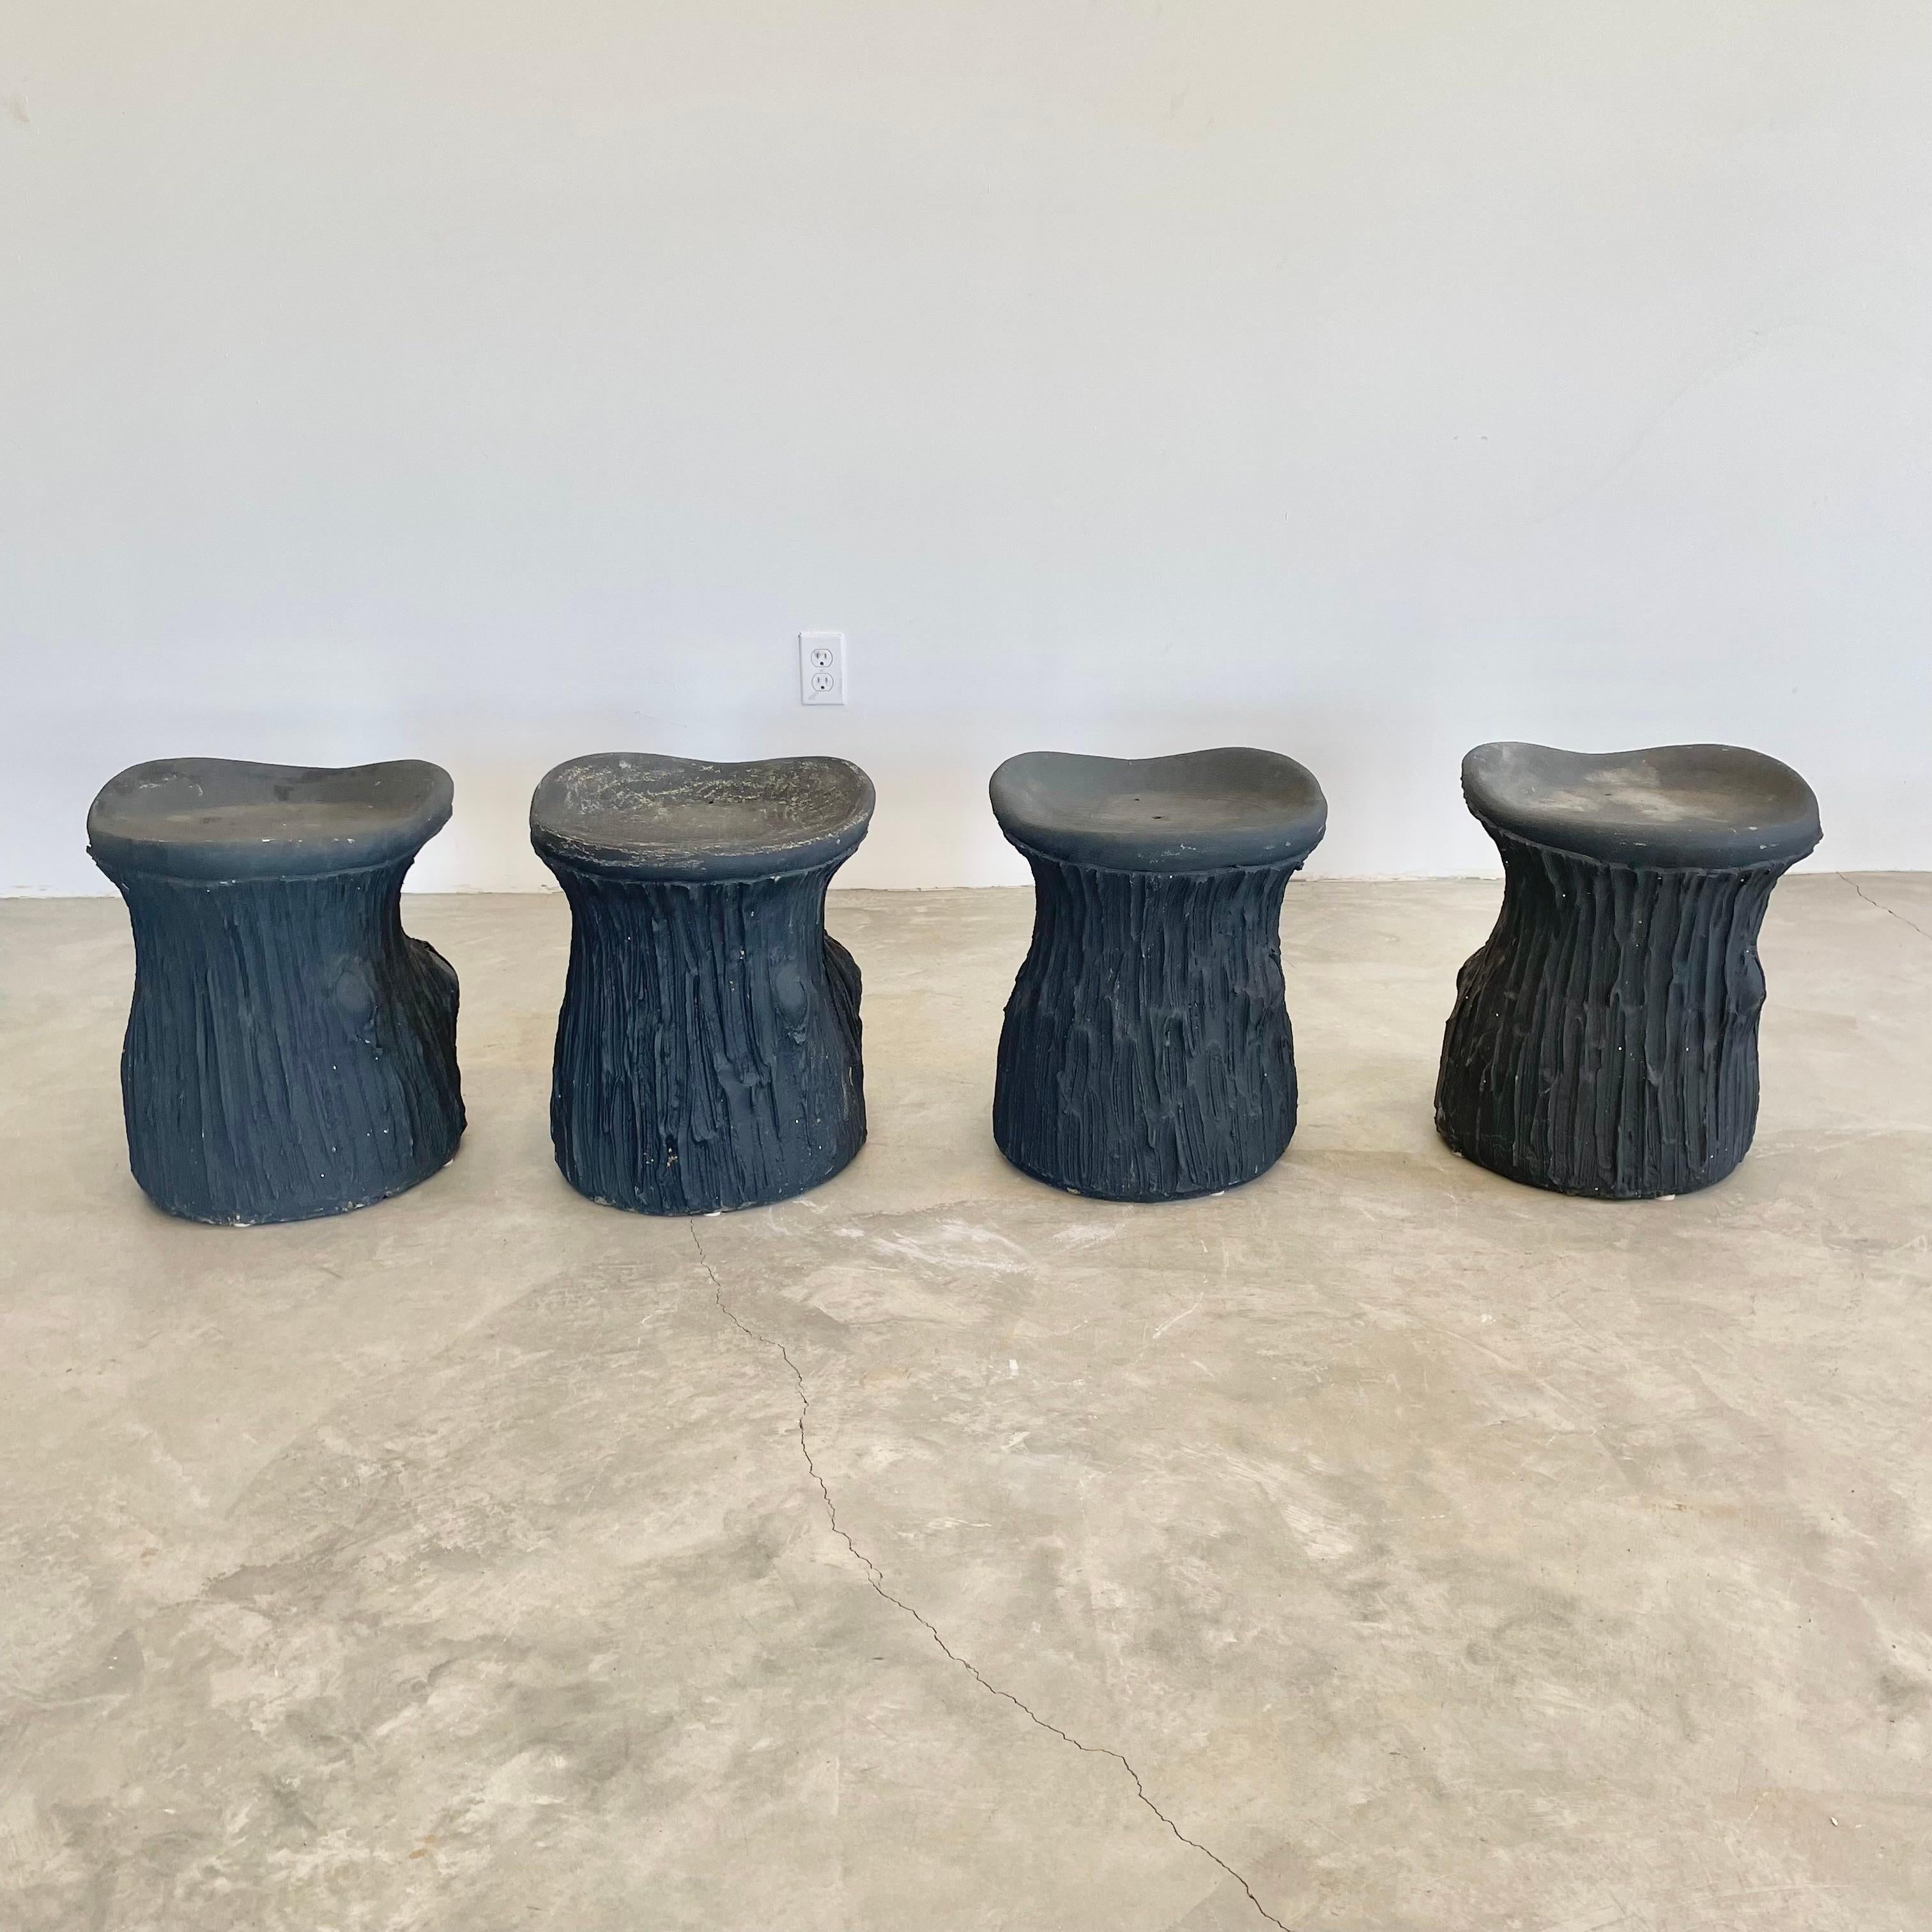 Substantial mid-century black concrete faux-bois stools, circa 1970s. Sculptural design. Great color and design details. Each stool is made of solid concrete which allows it to develop an incredible patina. Factory drilled drainage holes in each